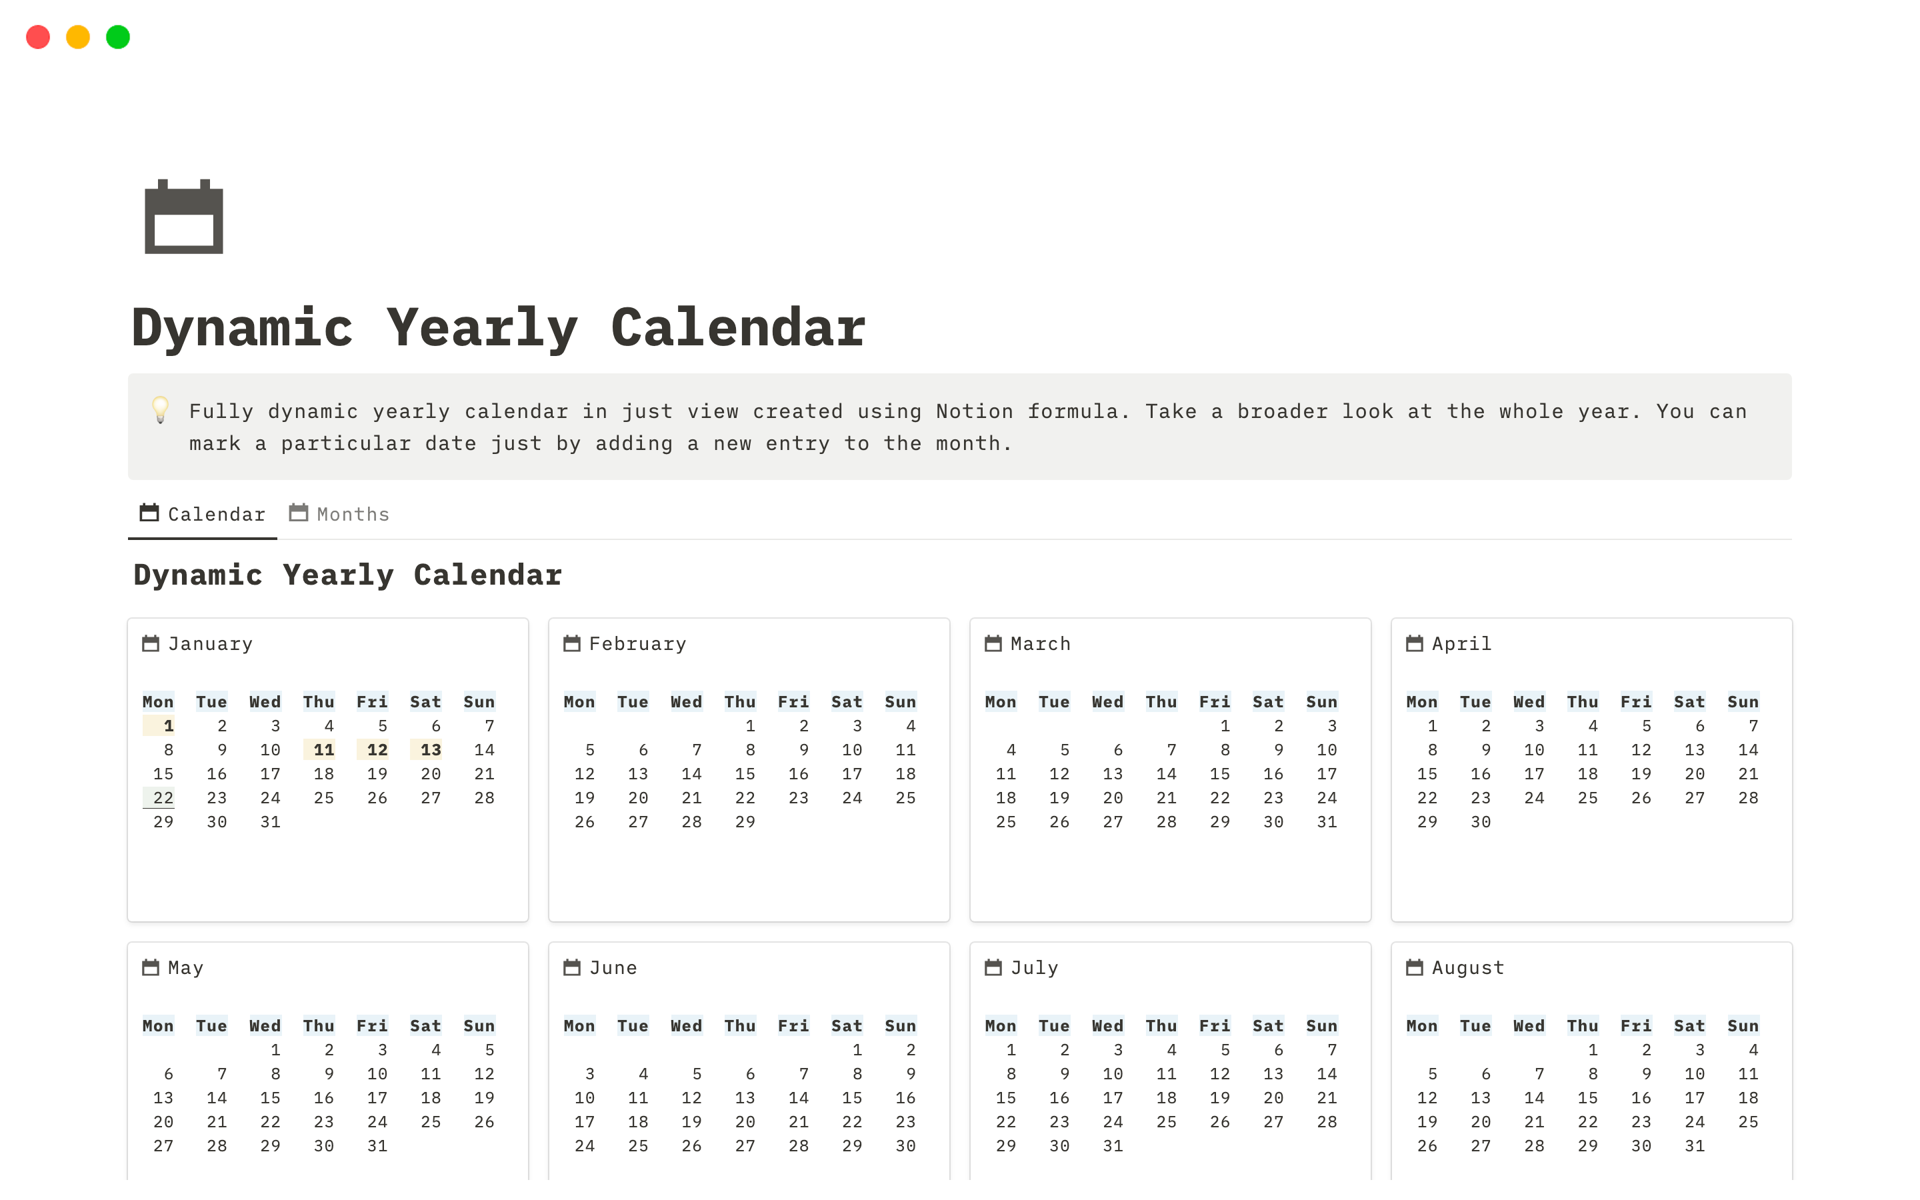 Fully dynamic yearly calendar created using Notion formula works seamlessly on Mono font. Take a broader look at the whole year. You can mark a particular date just by adding a new entry to the month.